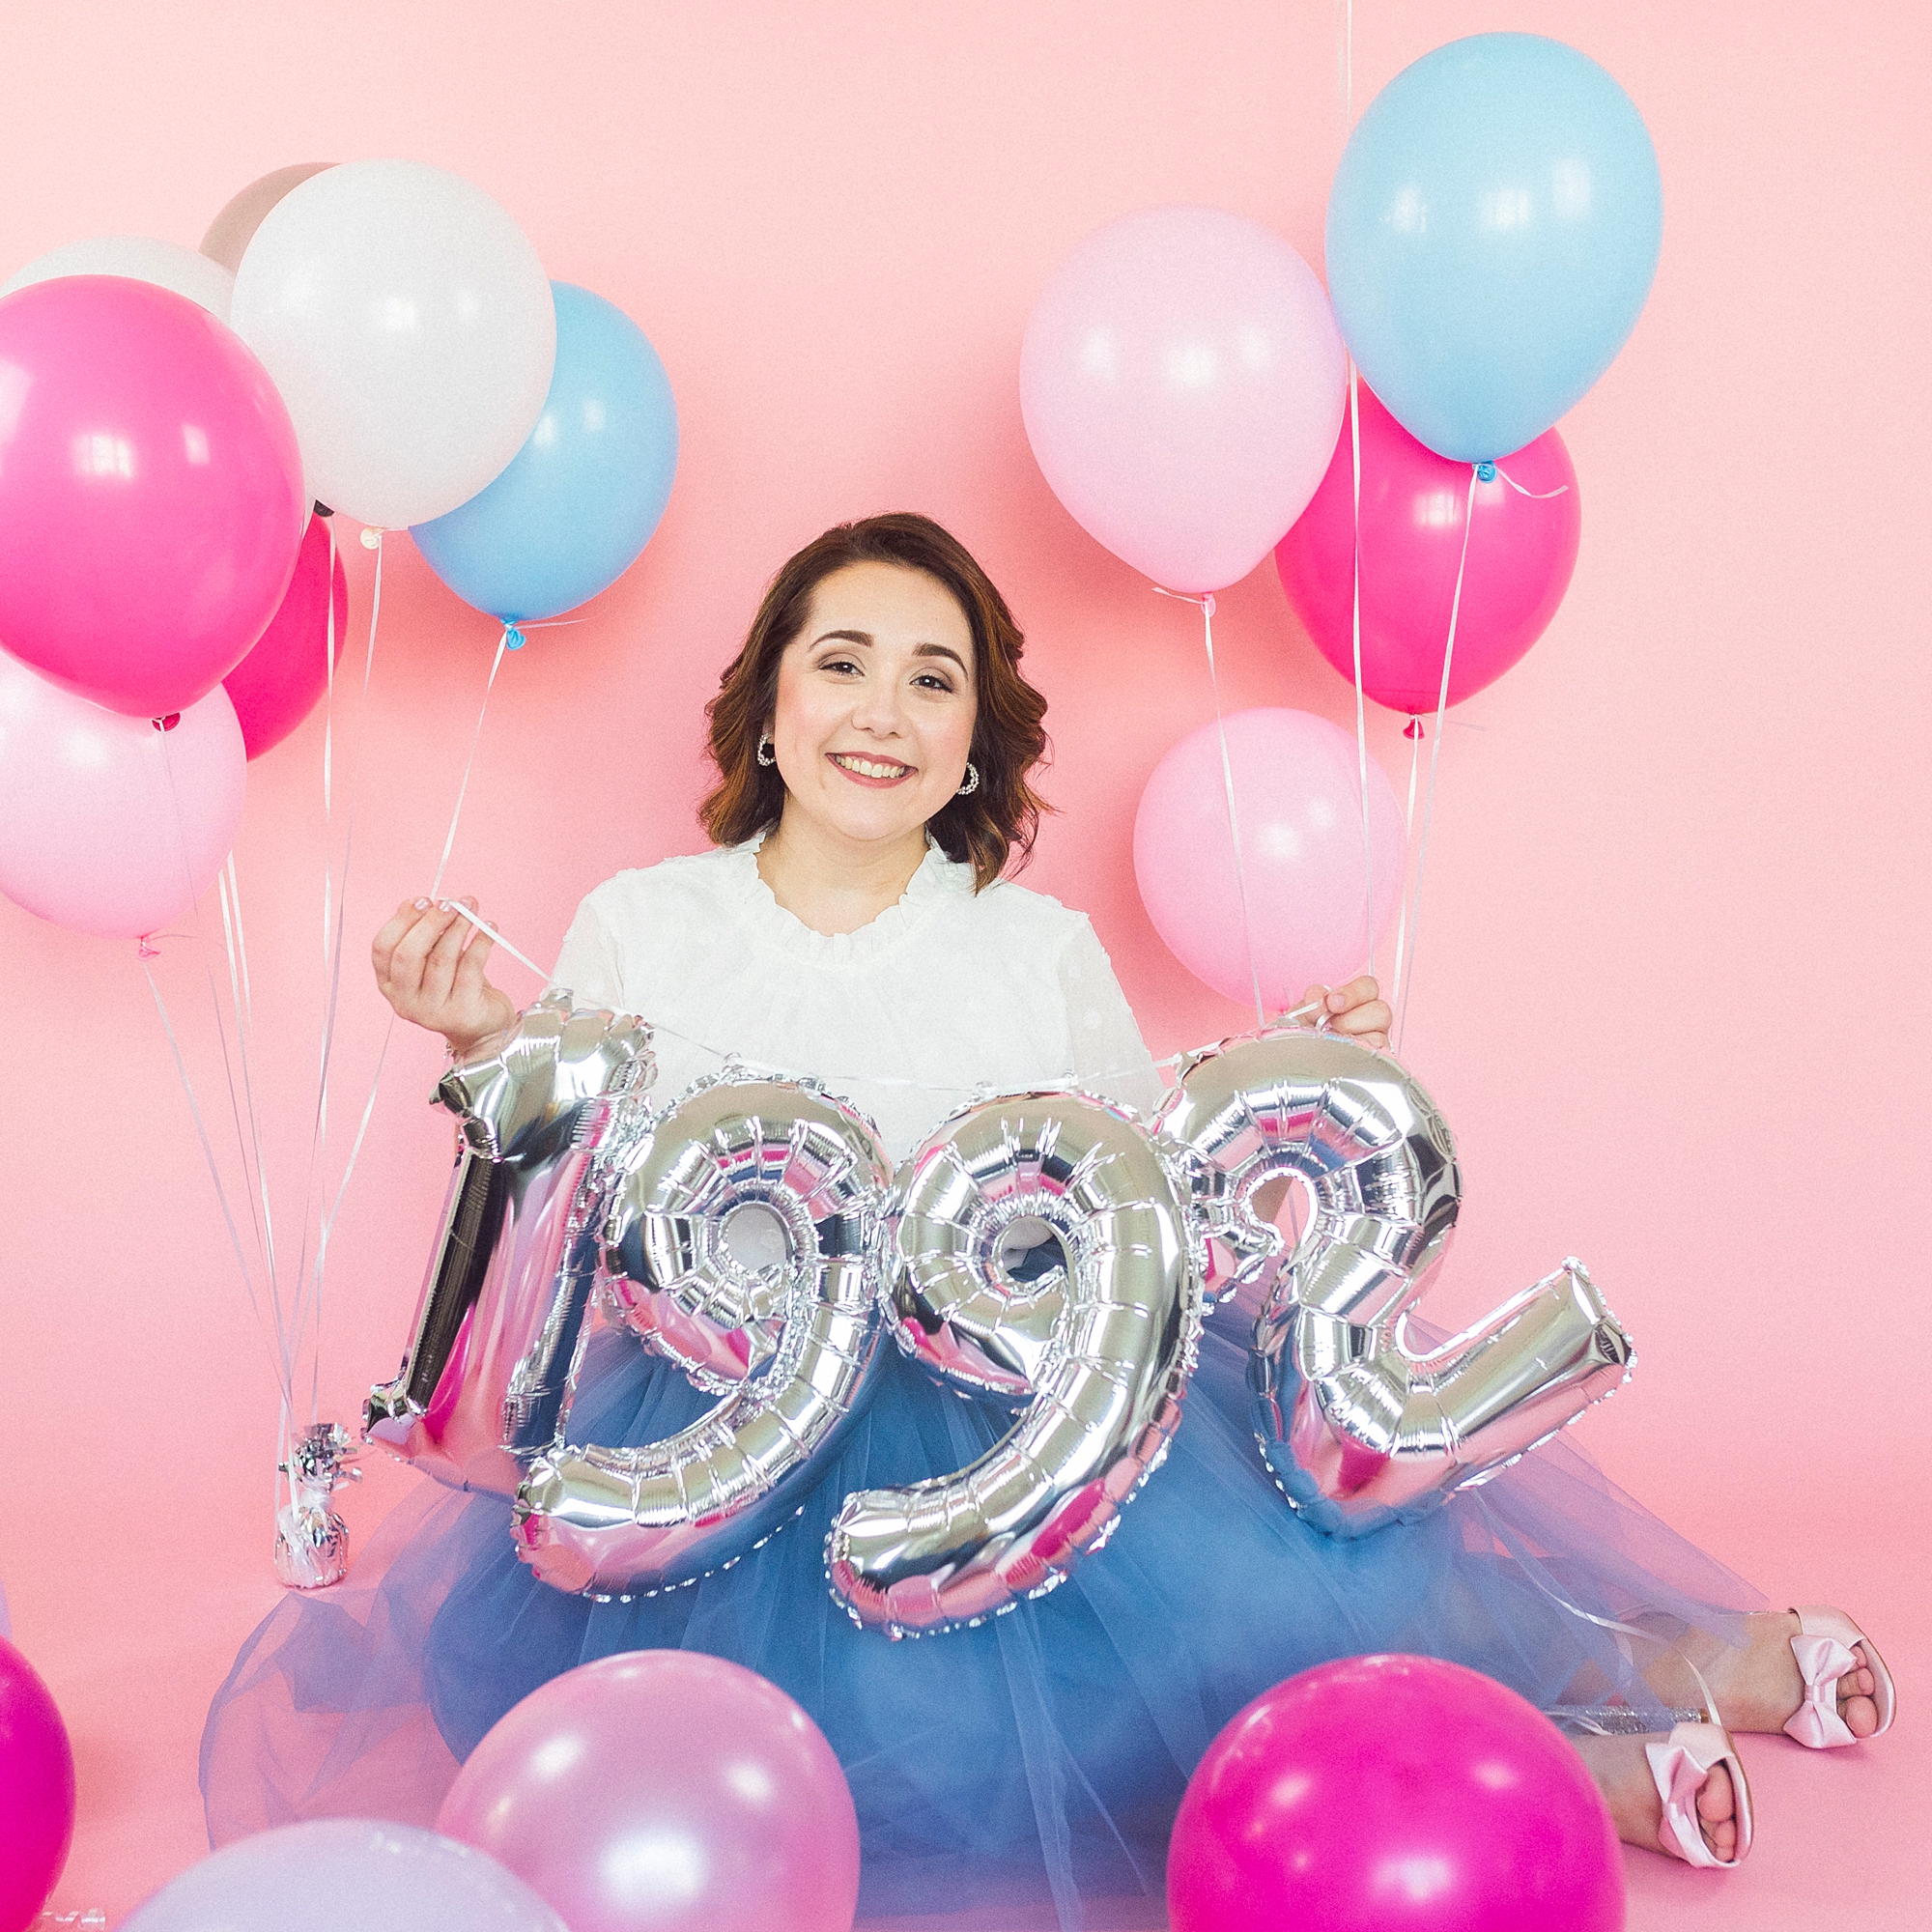 30th birthday portraits with bright balloons